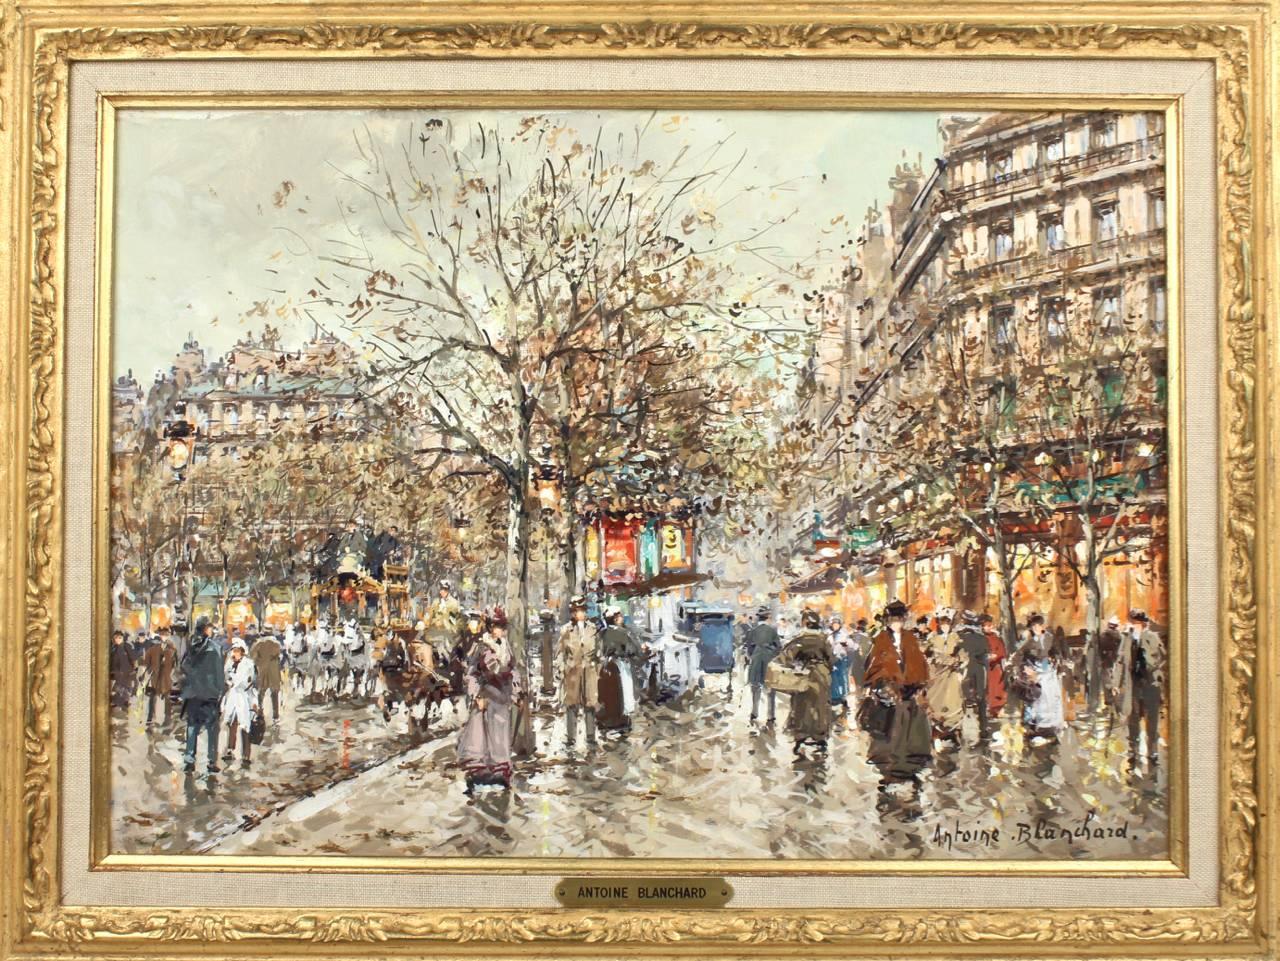 A fine impressionist oil on cavas painting by Antoine Blanchard (1910-1988) of bustling Parisian street scene from 1900.

Entitled 